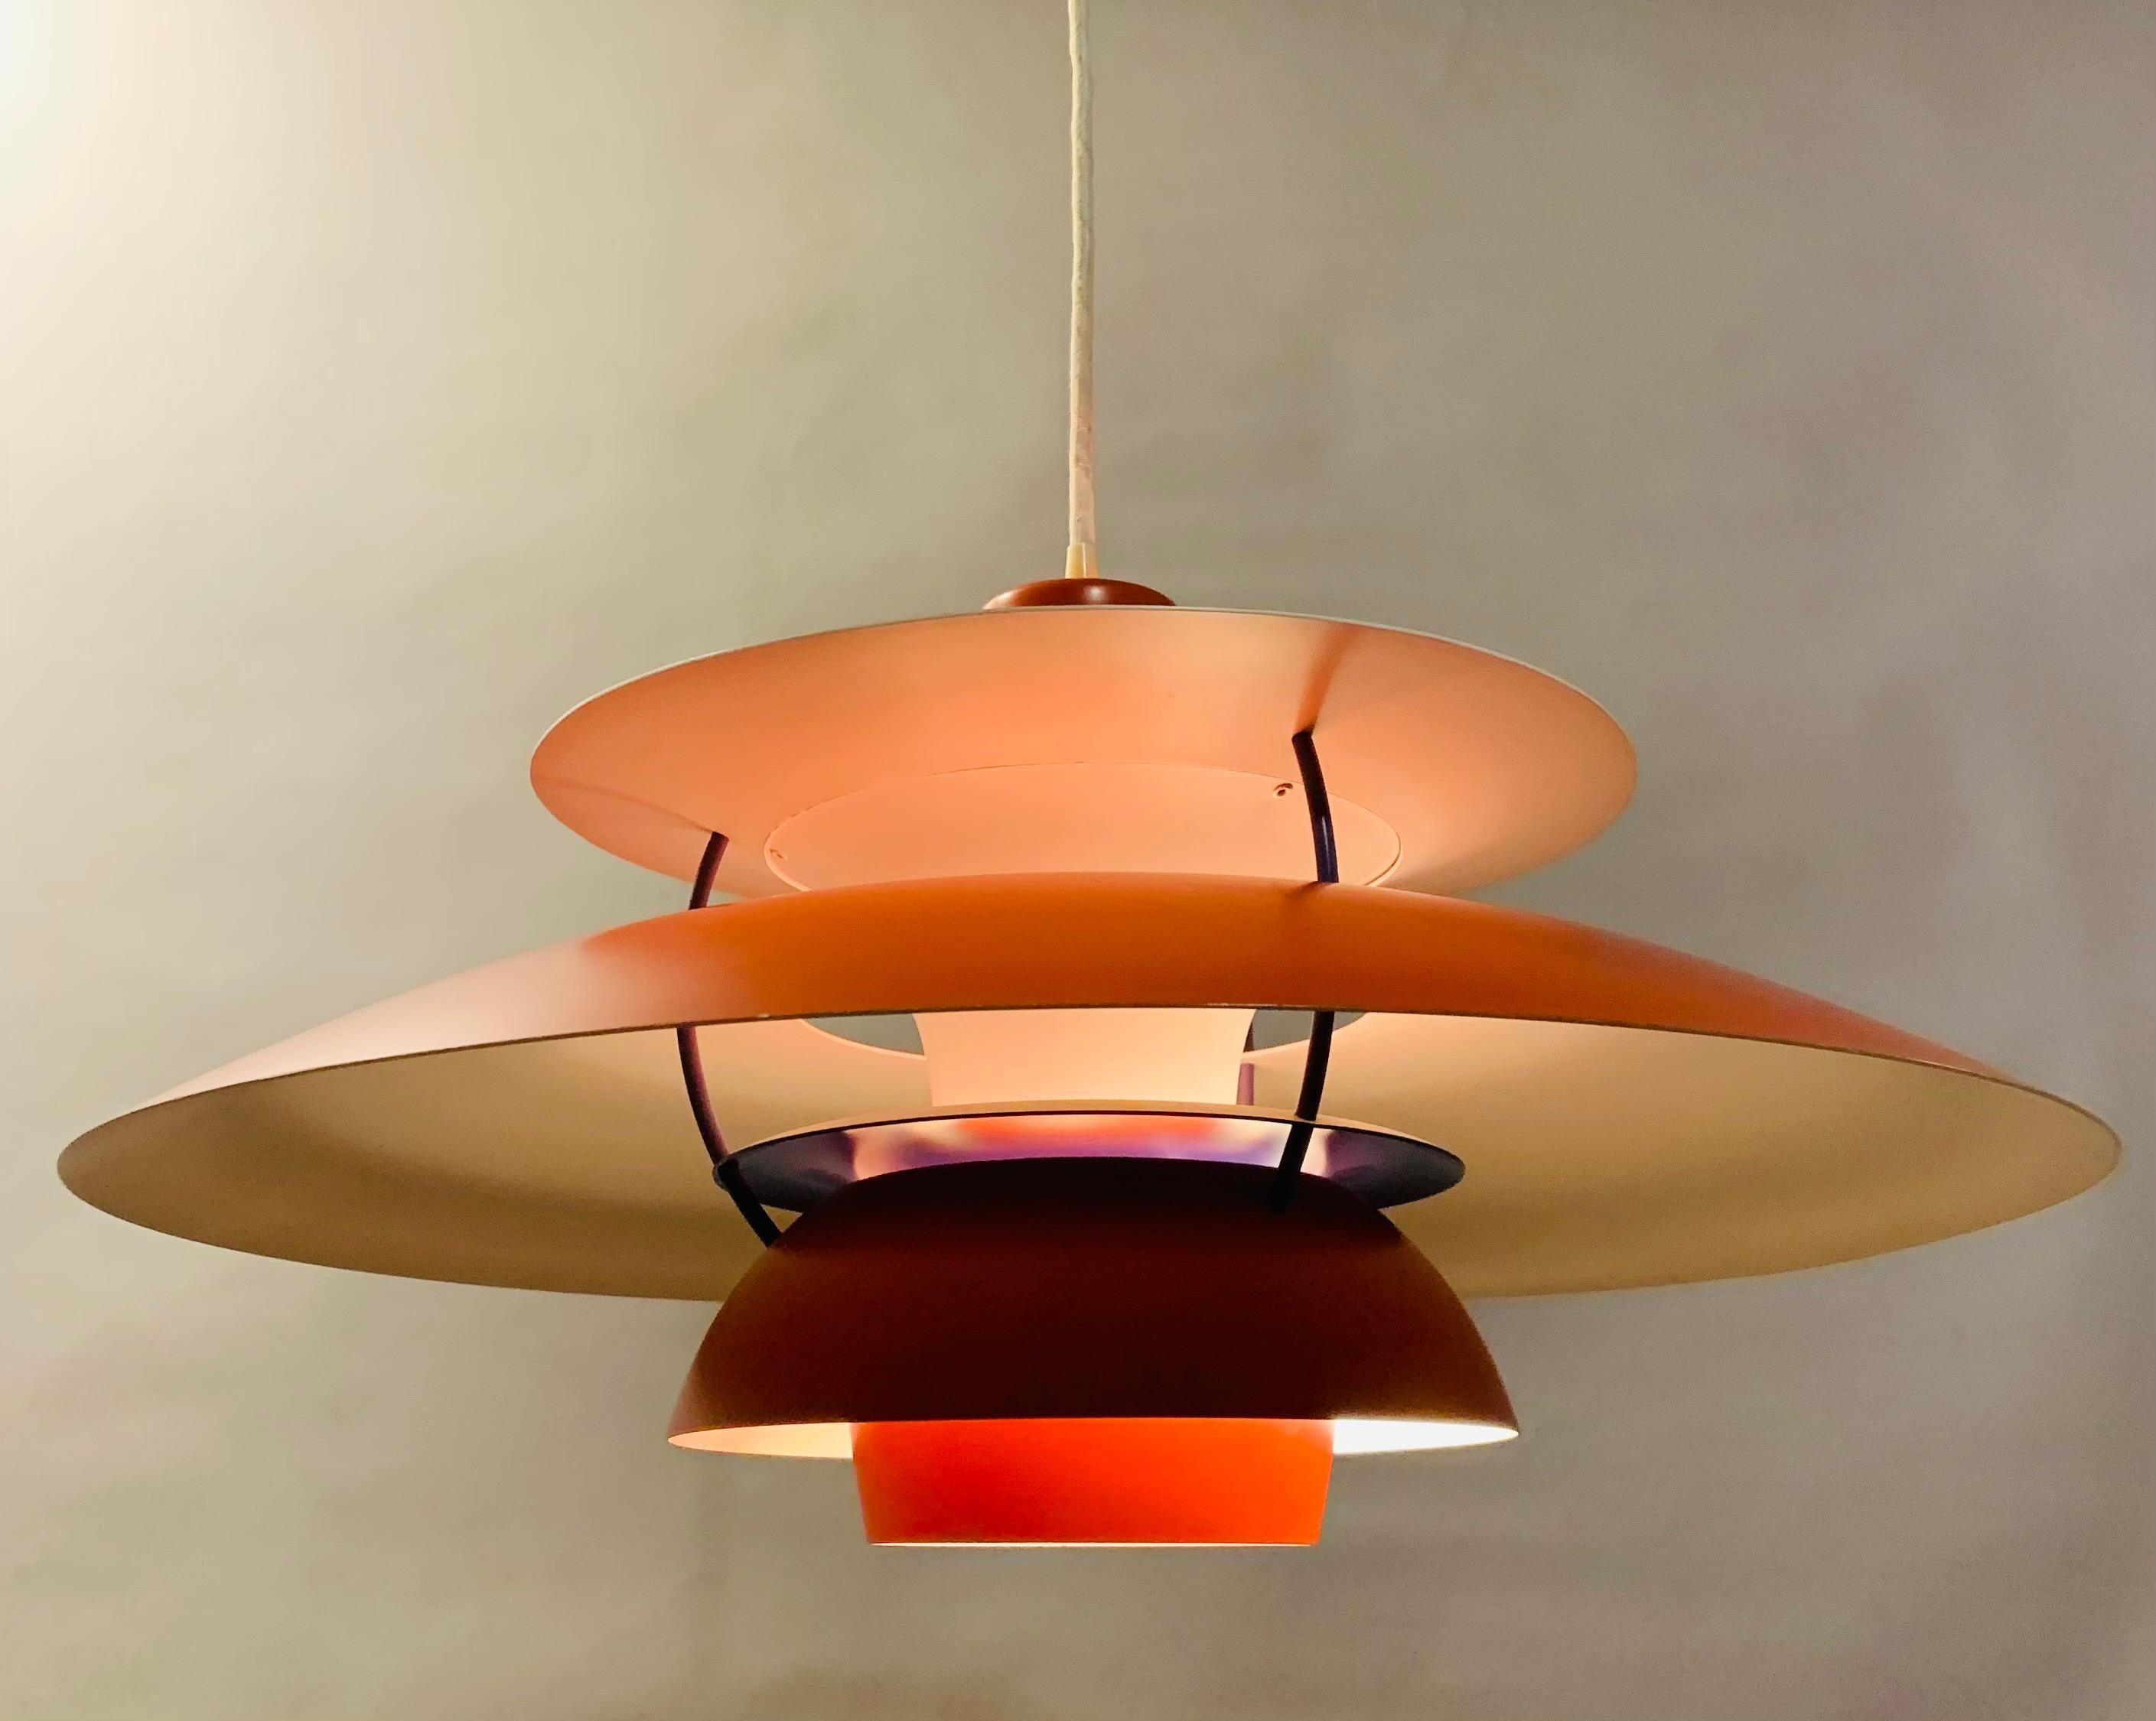 Danish 1960s,space-age, UFO shaped, mid century, large orange/rust coloured, white and blue hanging pendant light. This timeless design Model - PH5 pendant light was designed by Poul Henningsen for Louis Poulsen in 1956. This lacquered metal light